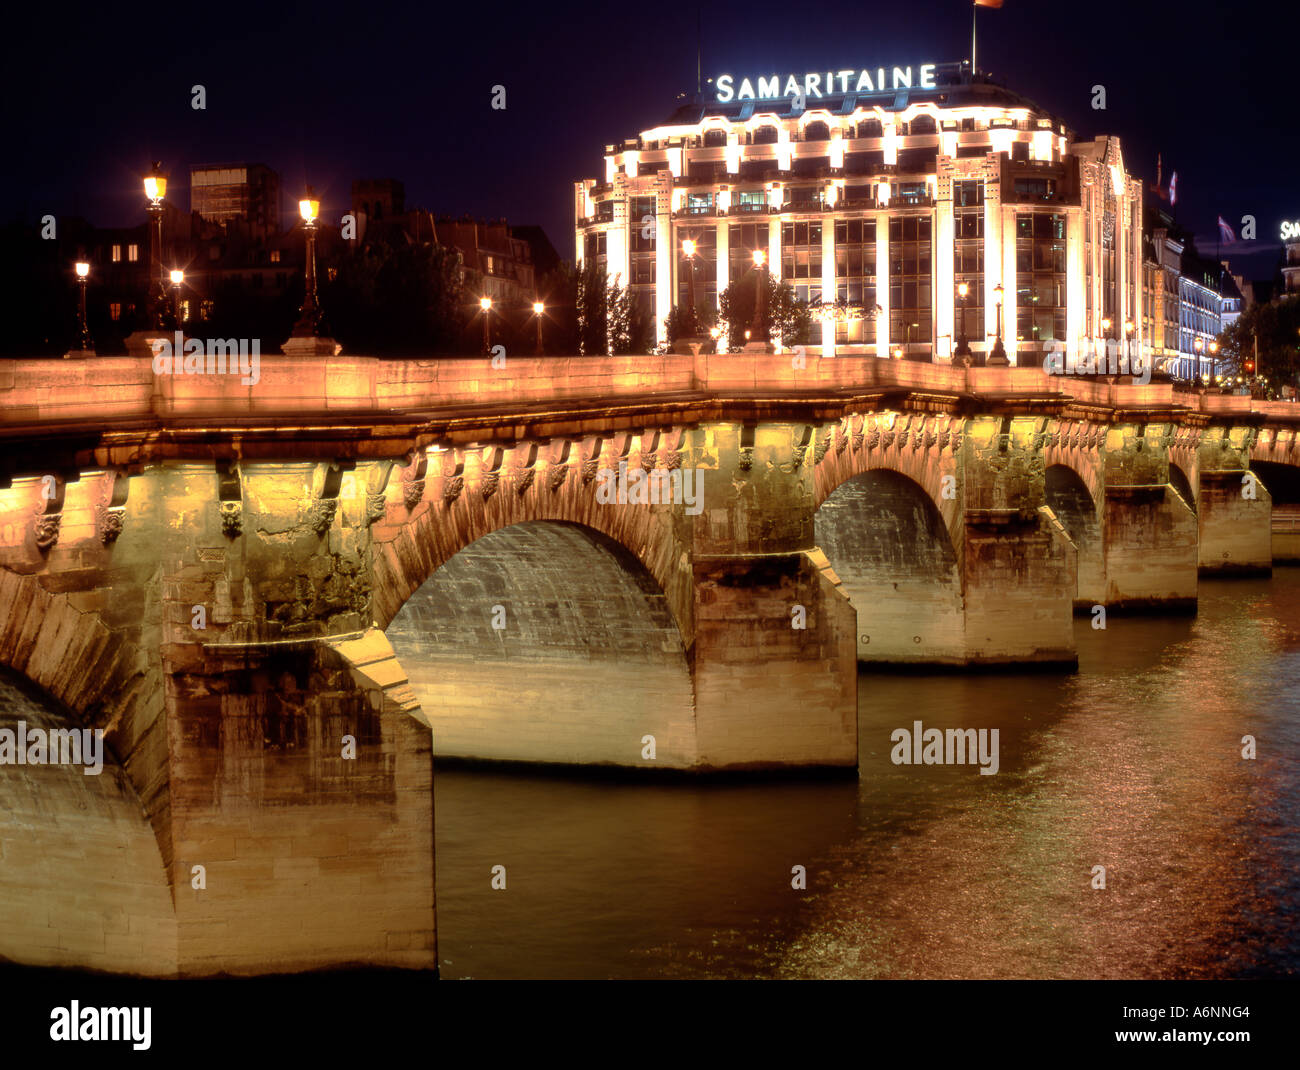 Paris, France - 07 02 2021: La Samaritaine department store. Outside view  of the facade from the Pont Neuf Stock Photo - Alamy